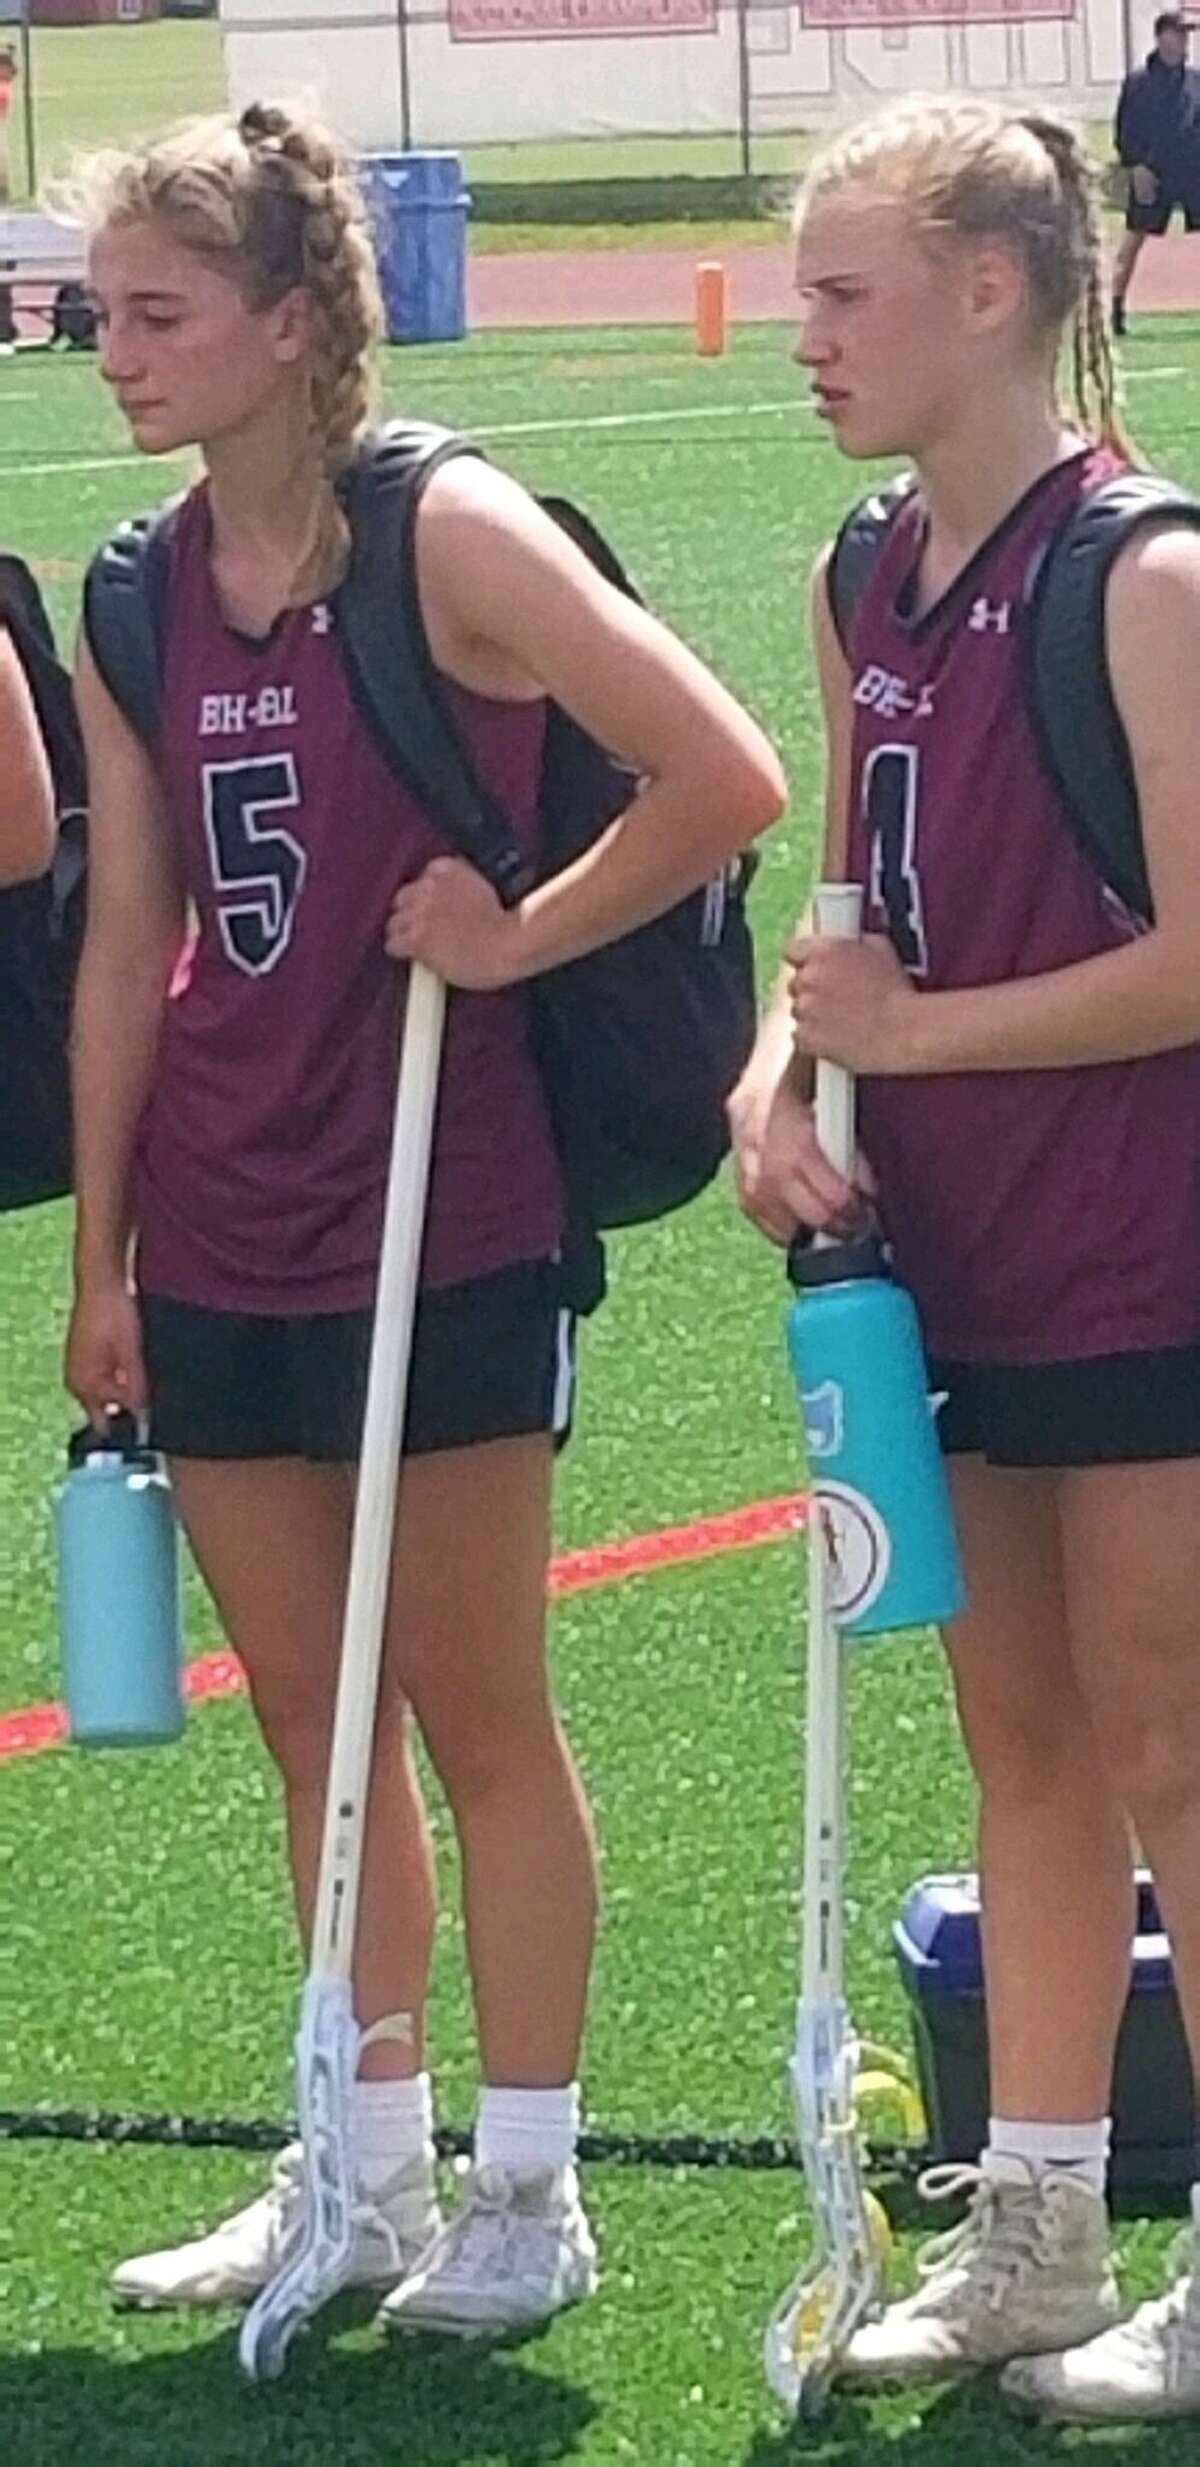 Ella Blesi, left, and Maggie Lescault of Burnt Hills react during the awards ceremony after falling in the Class C girls' lacrosse state semifinals on Friday.